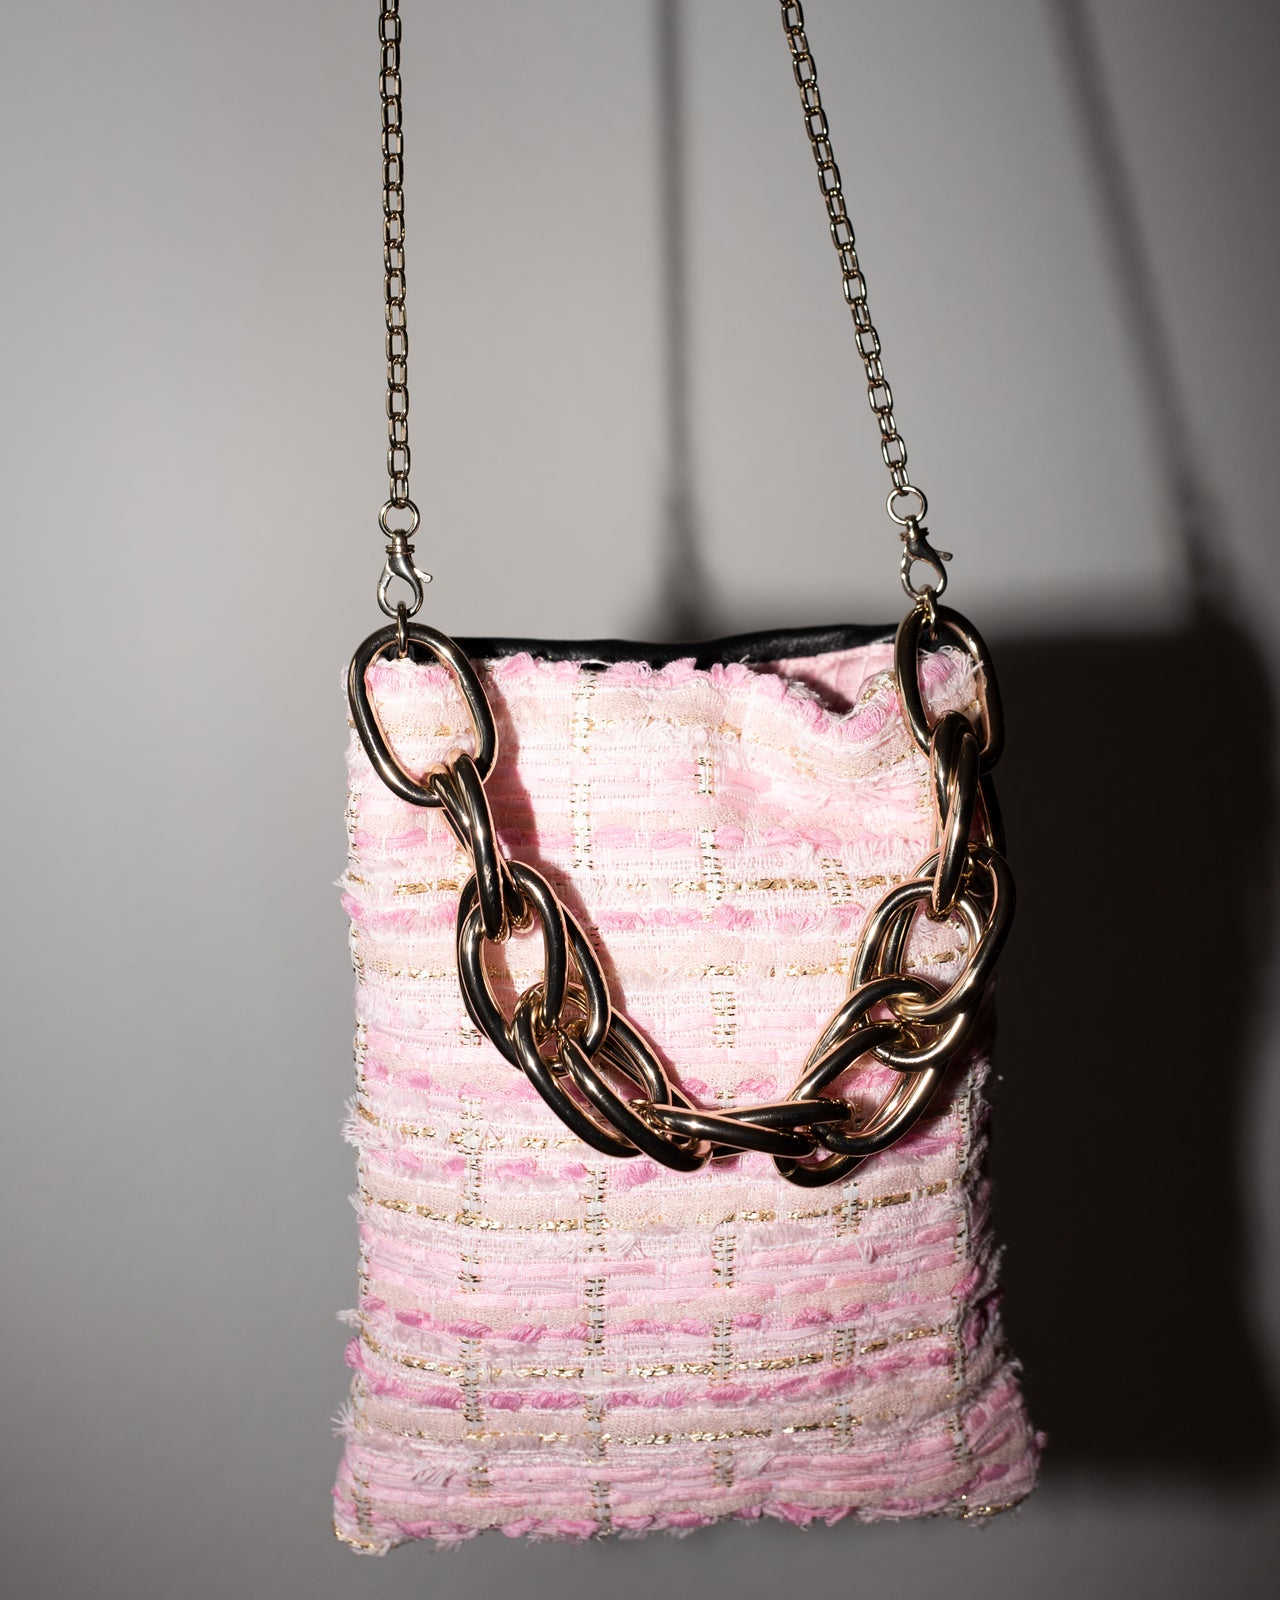 Bag with Light Pink Tweed and Black Leather Gold Chain